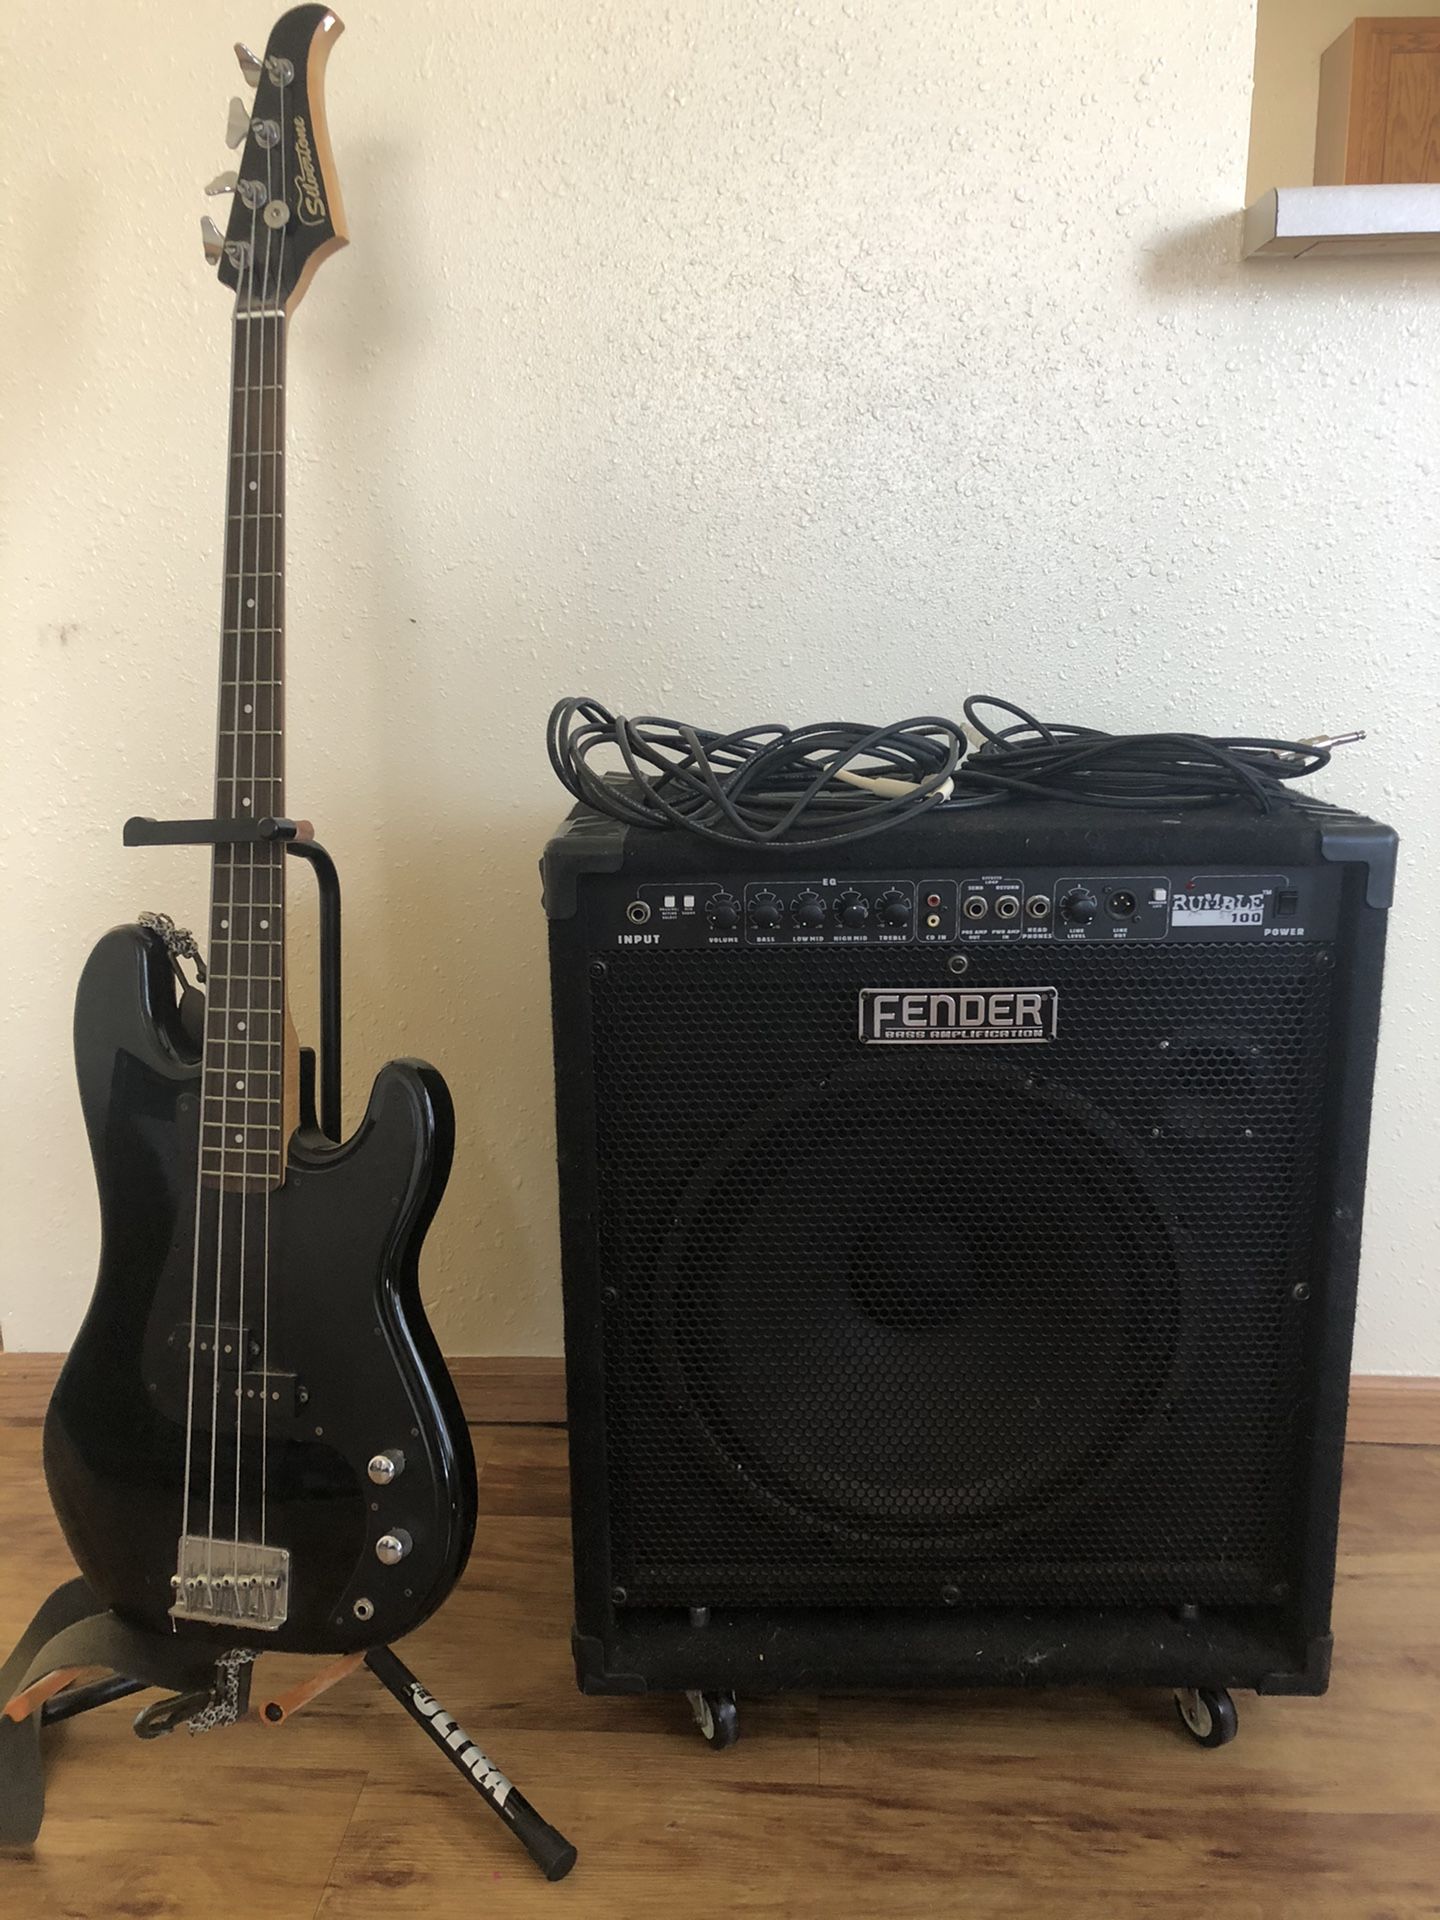 Fender 100 amp, bass guitar, and cords